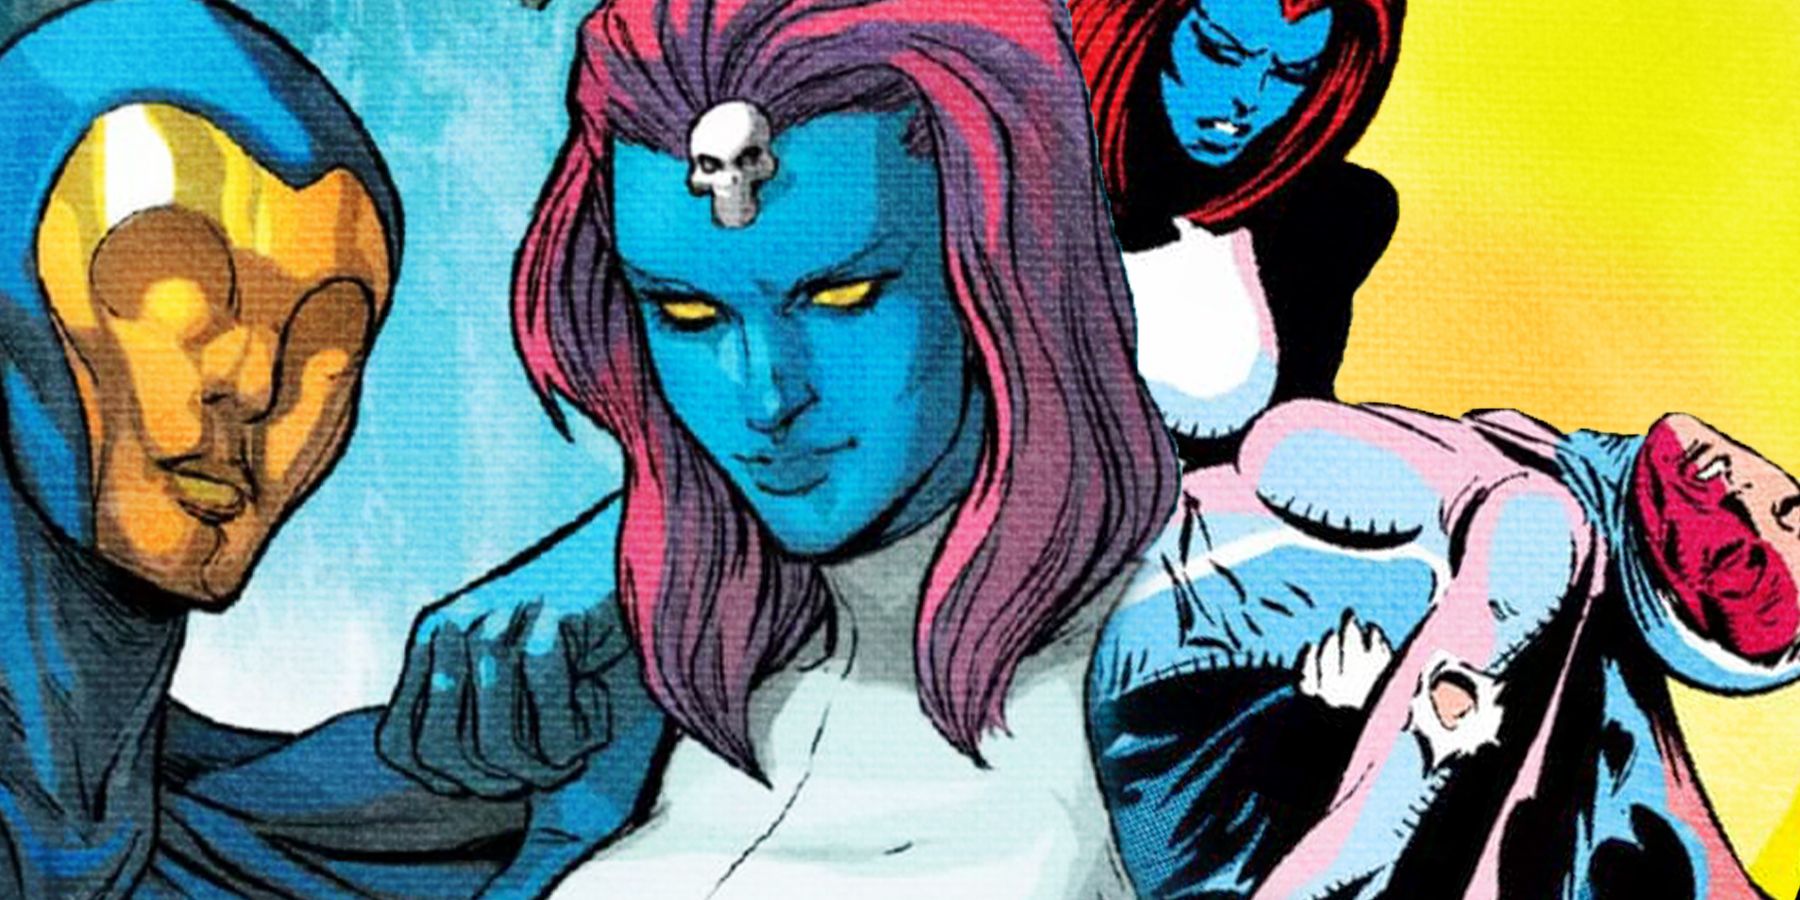 On the left, Destiny has her arm around Mystique. On the right, Mystique is seen holding a dying Destiny in her arms.